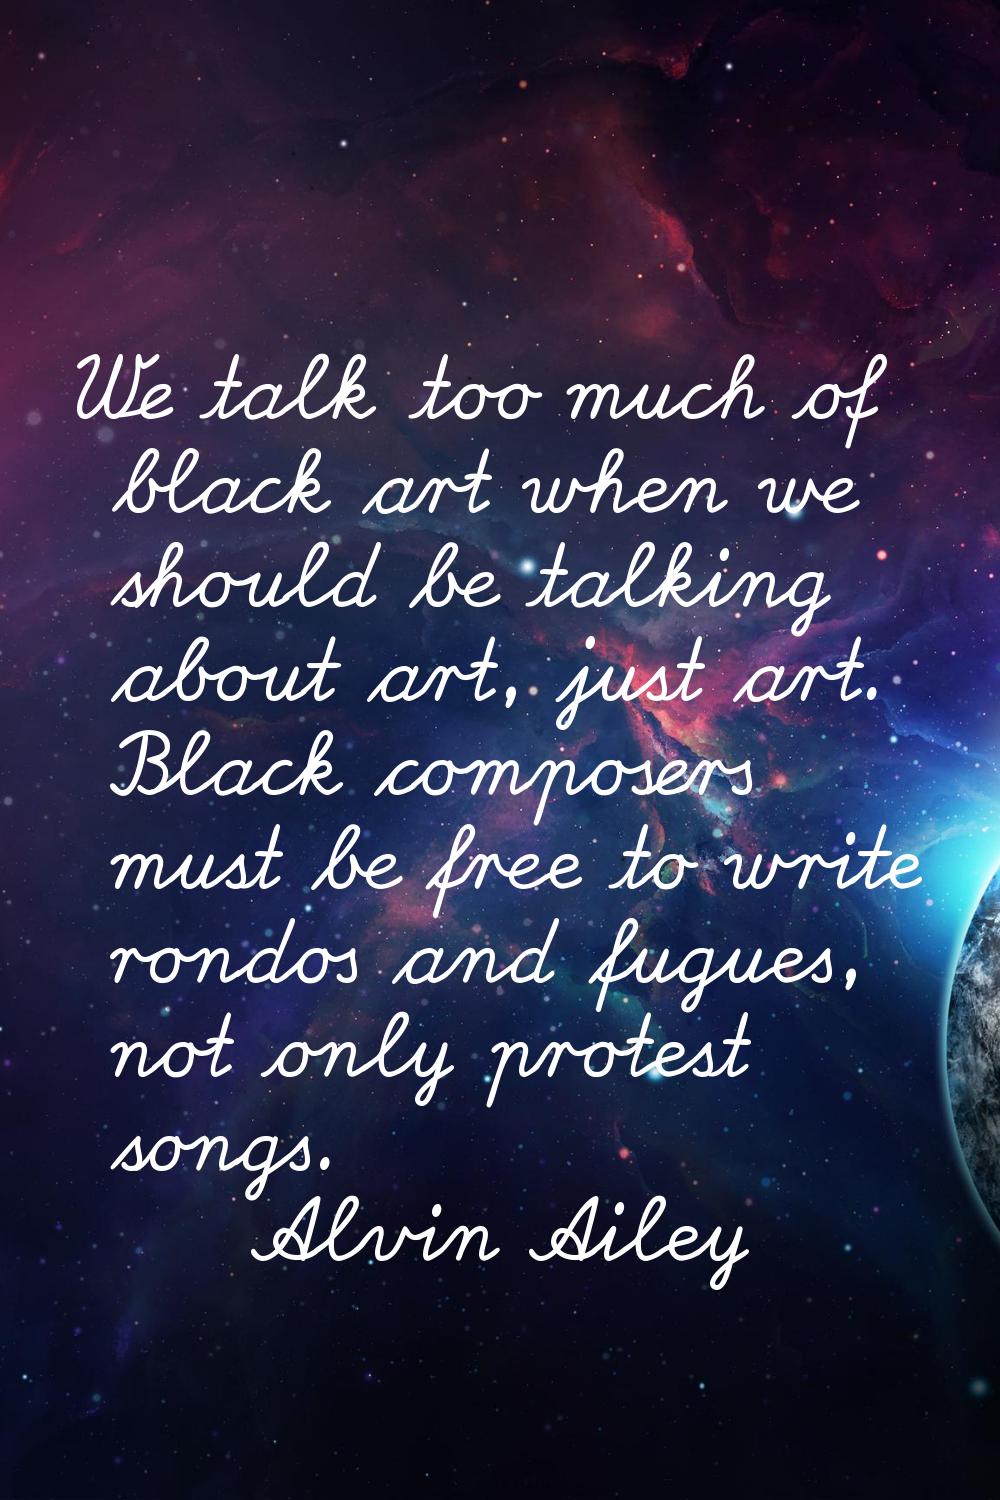 We talk too much of black art when we should be talking about art, just art. Black composers must b